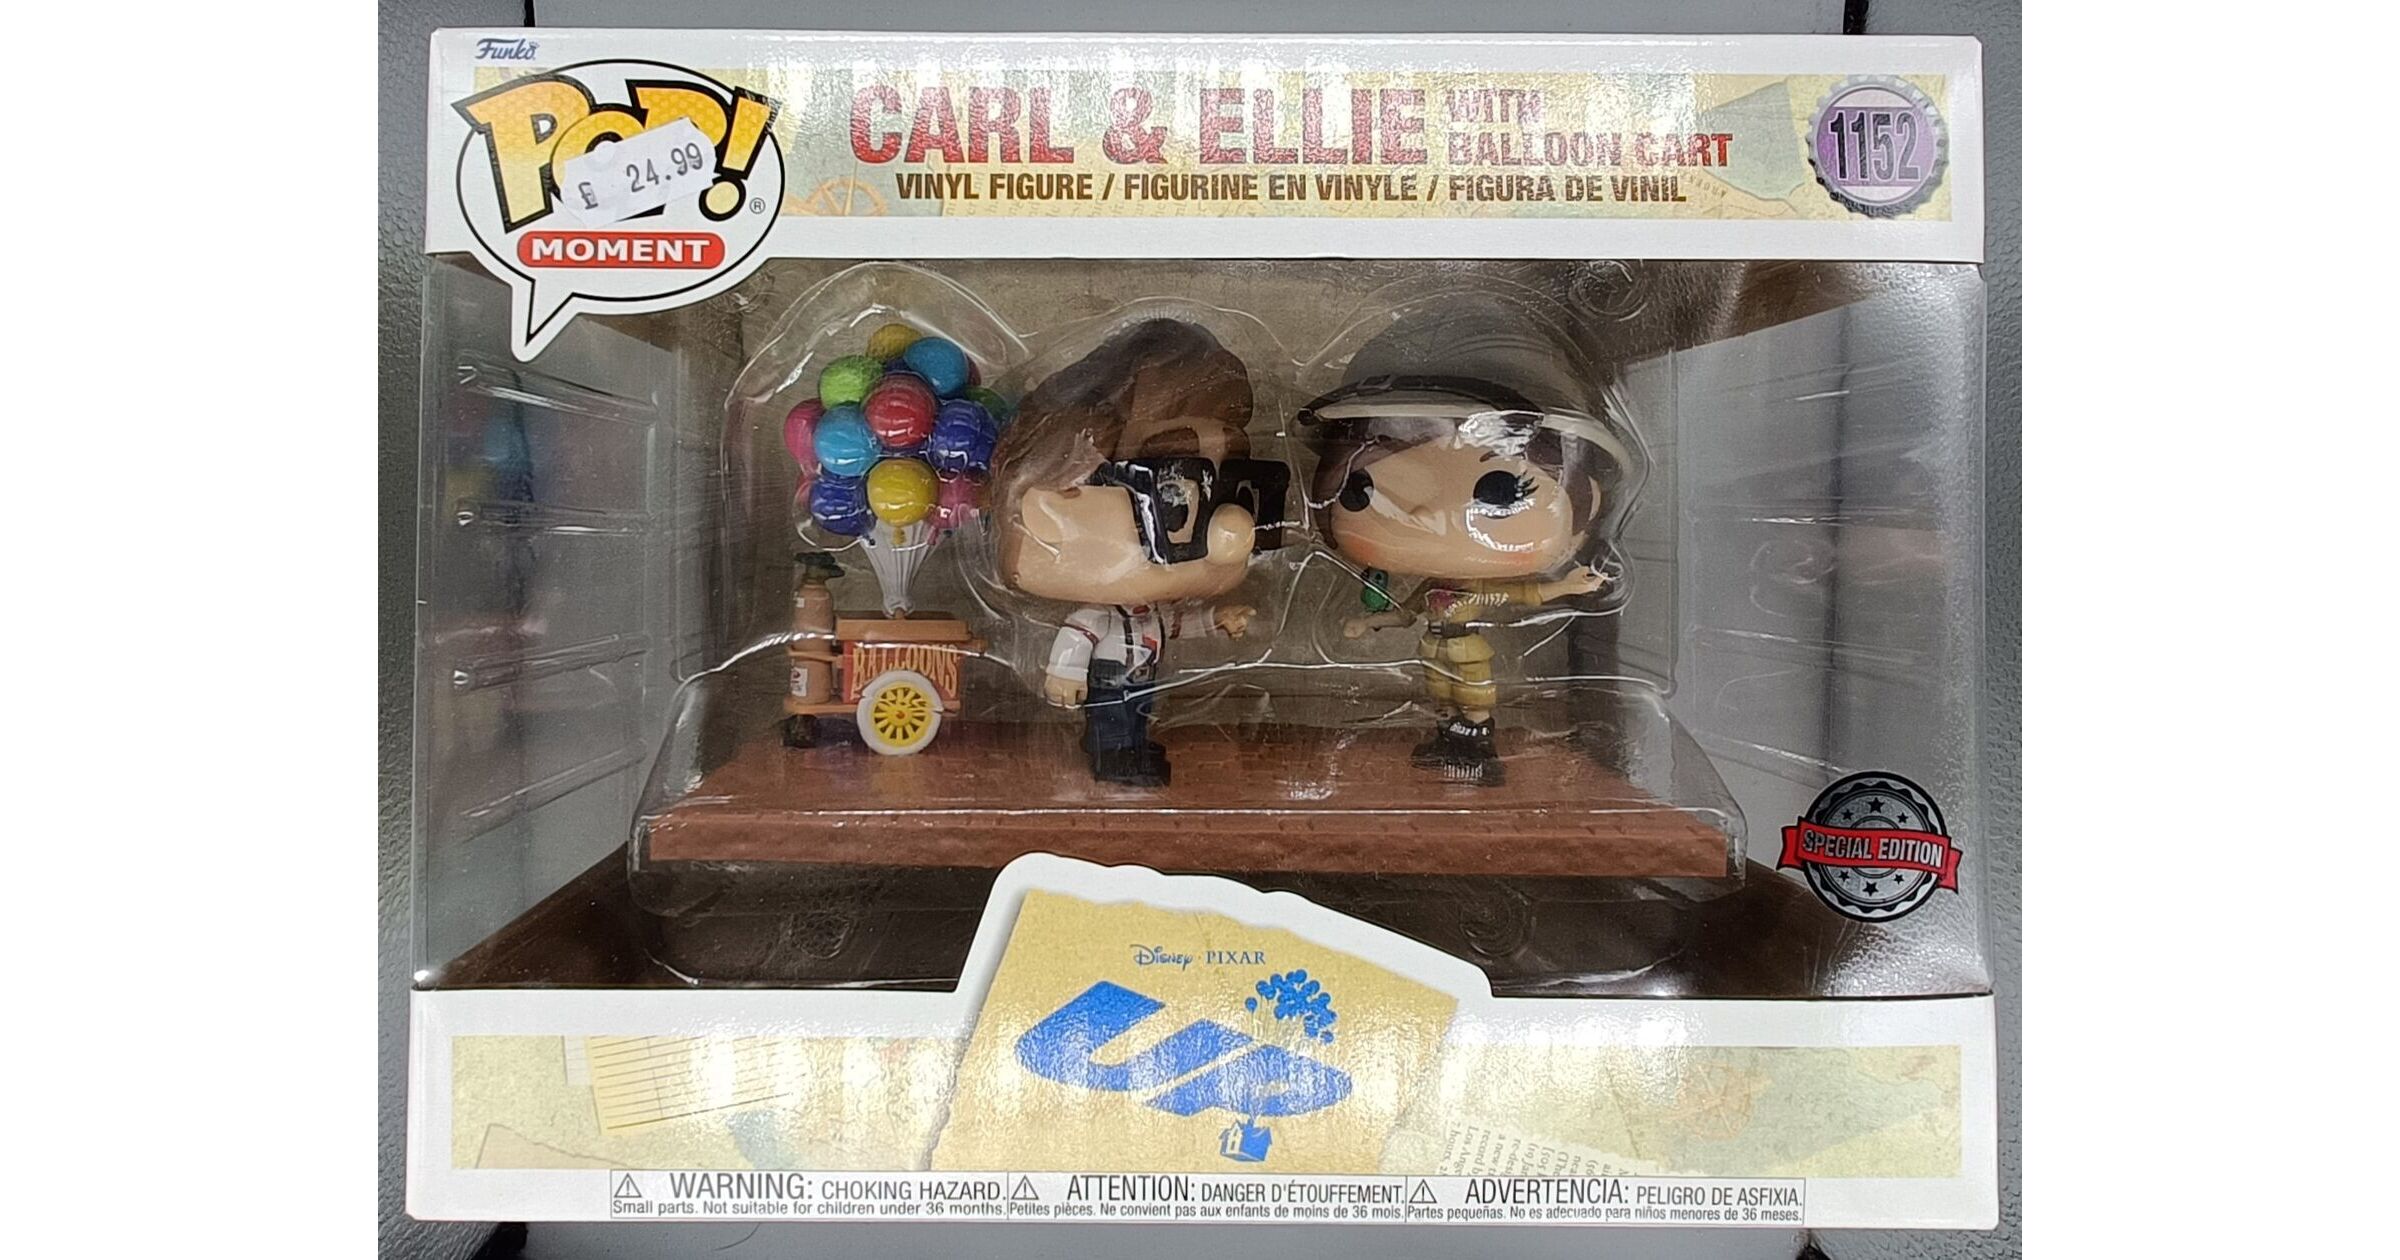 UP - Carl & Ellie with Balloon Cart - POP! Disney action figure 1152